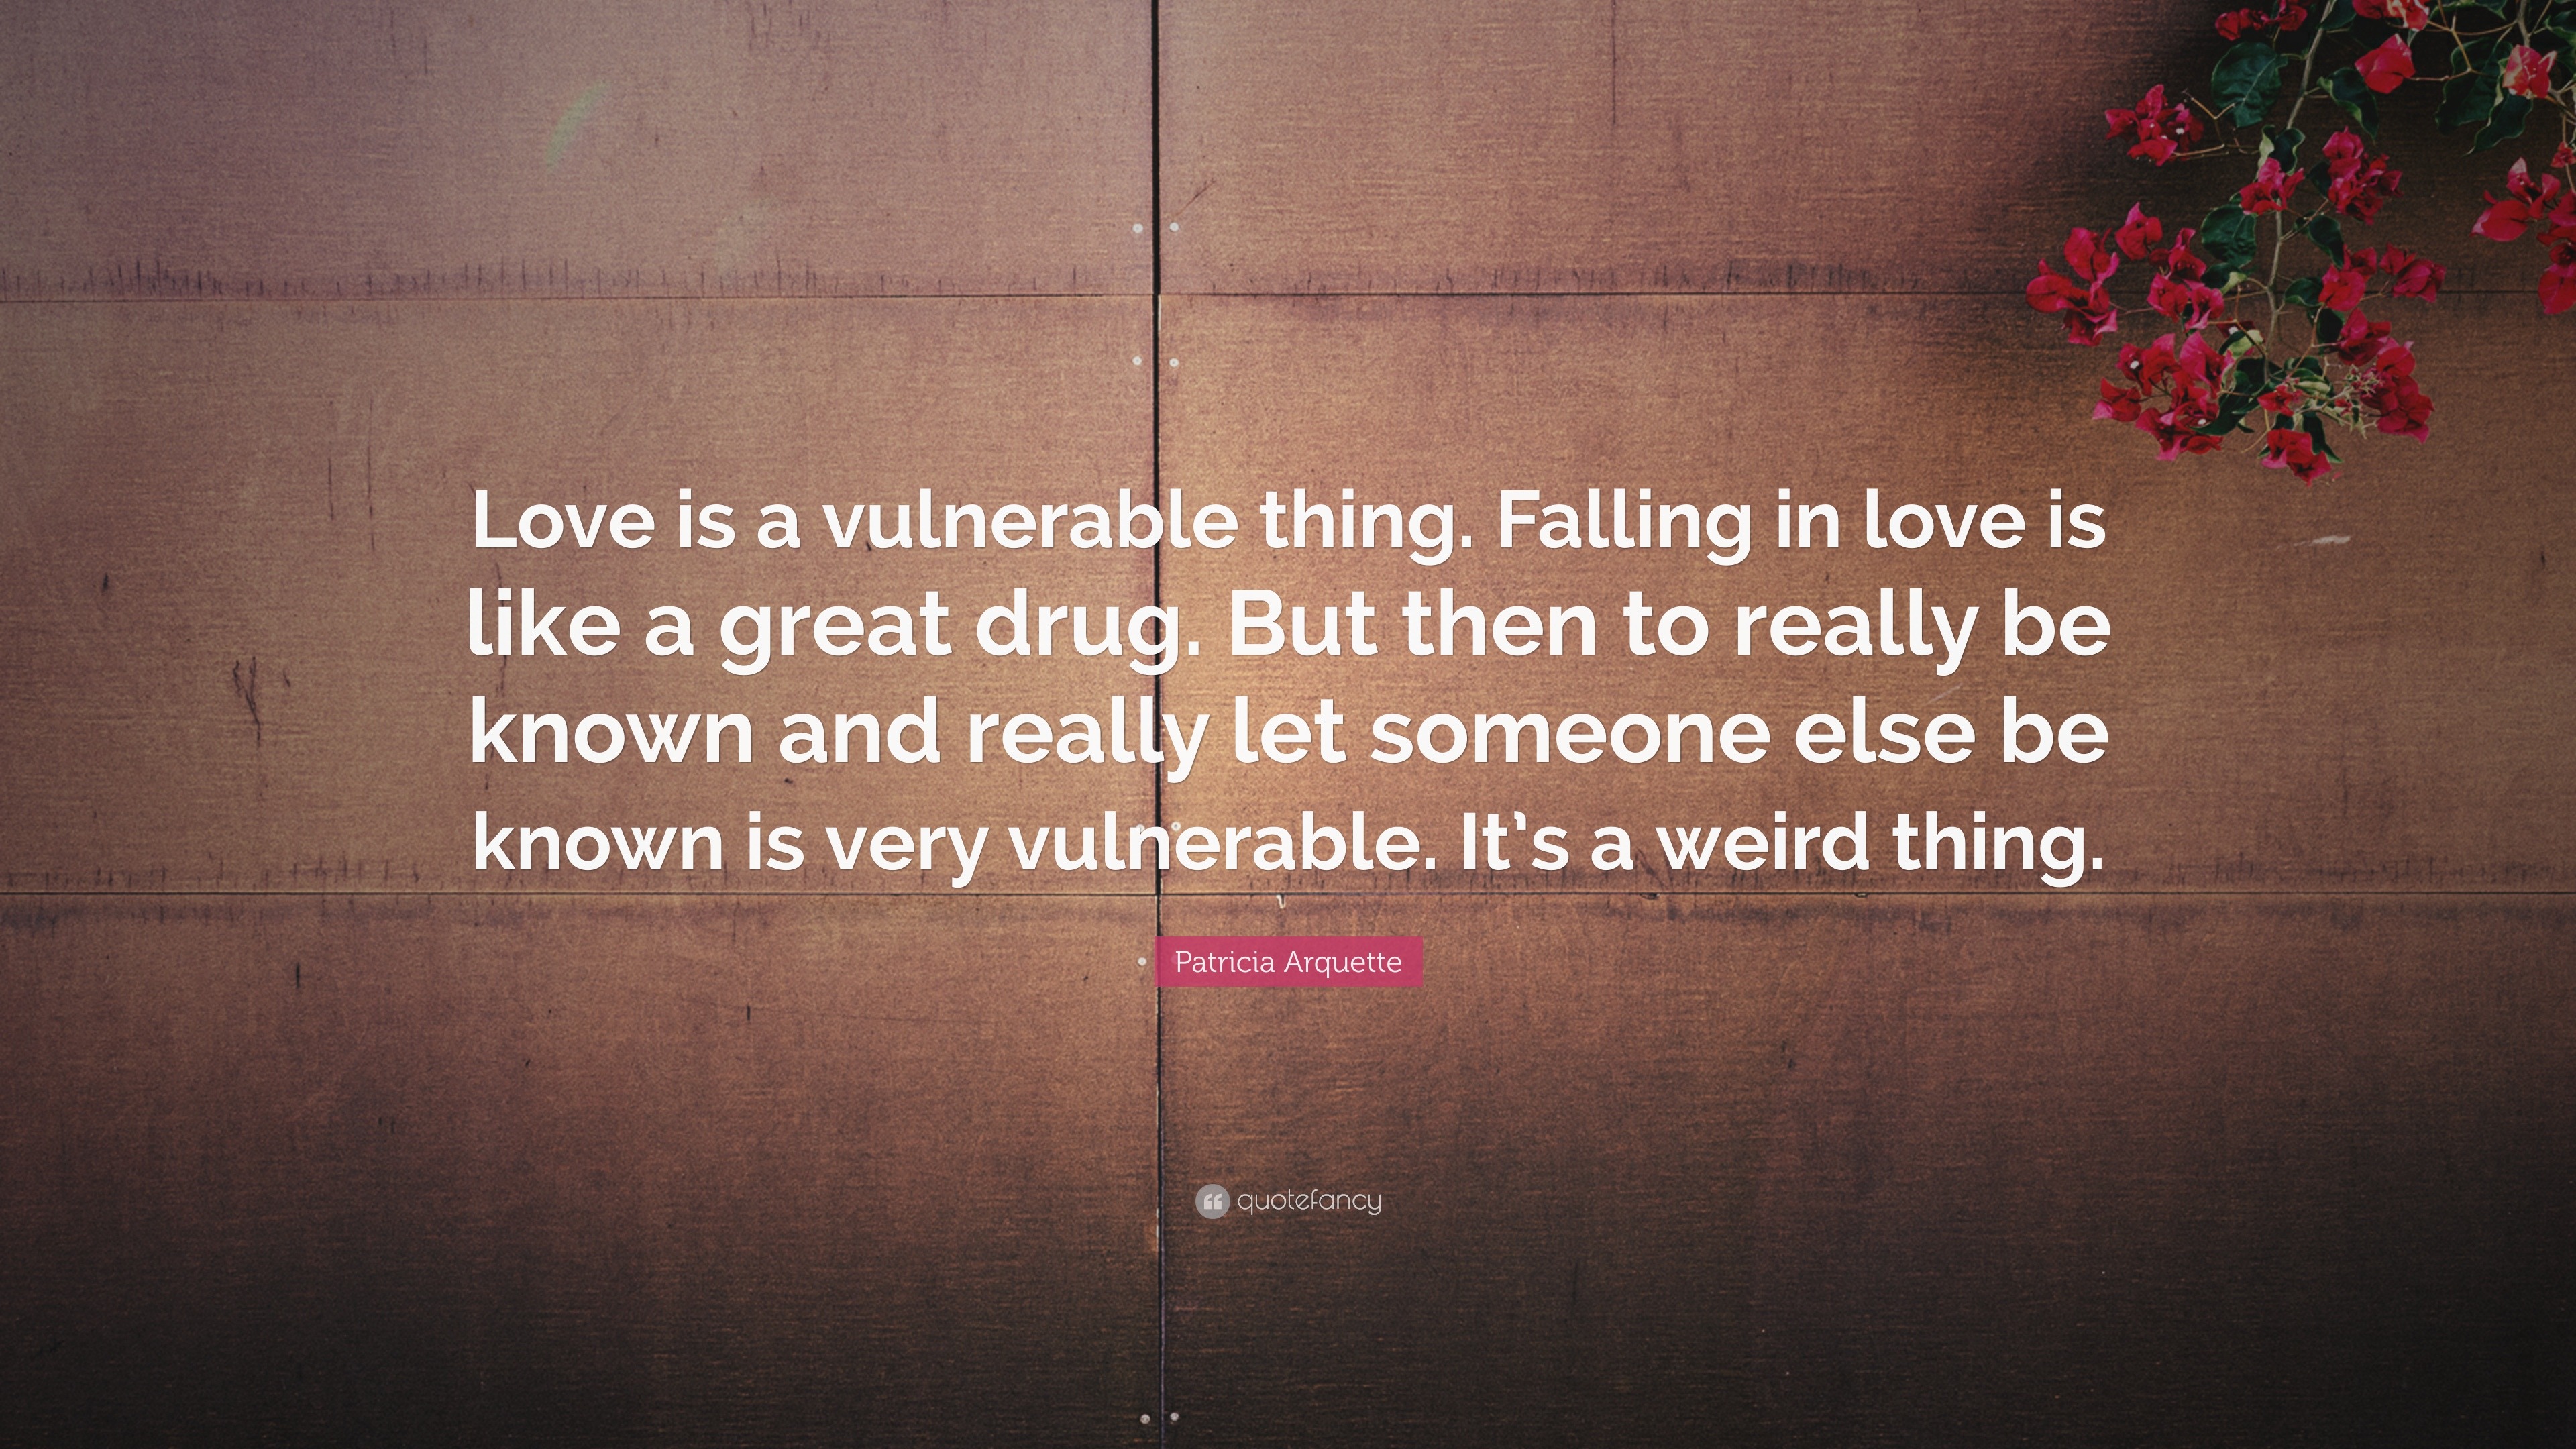 Patricia Arquette Quote “Love is a vulnerable thing Falling in love is like